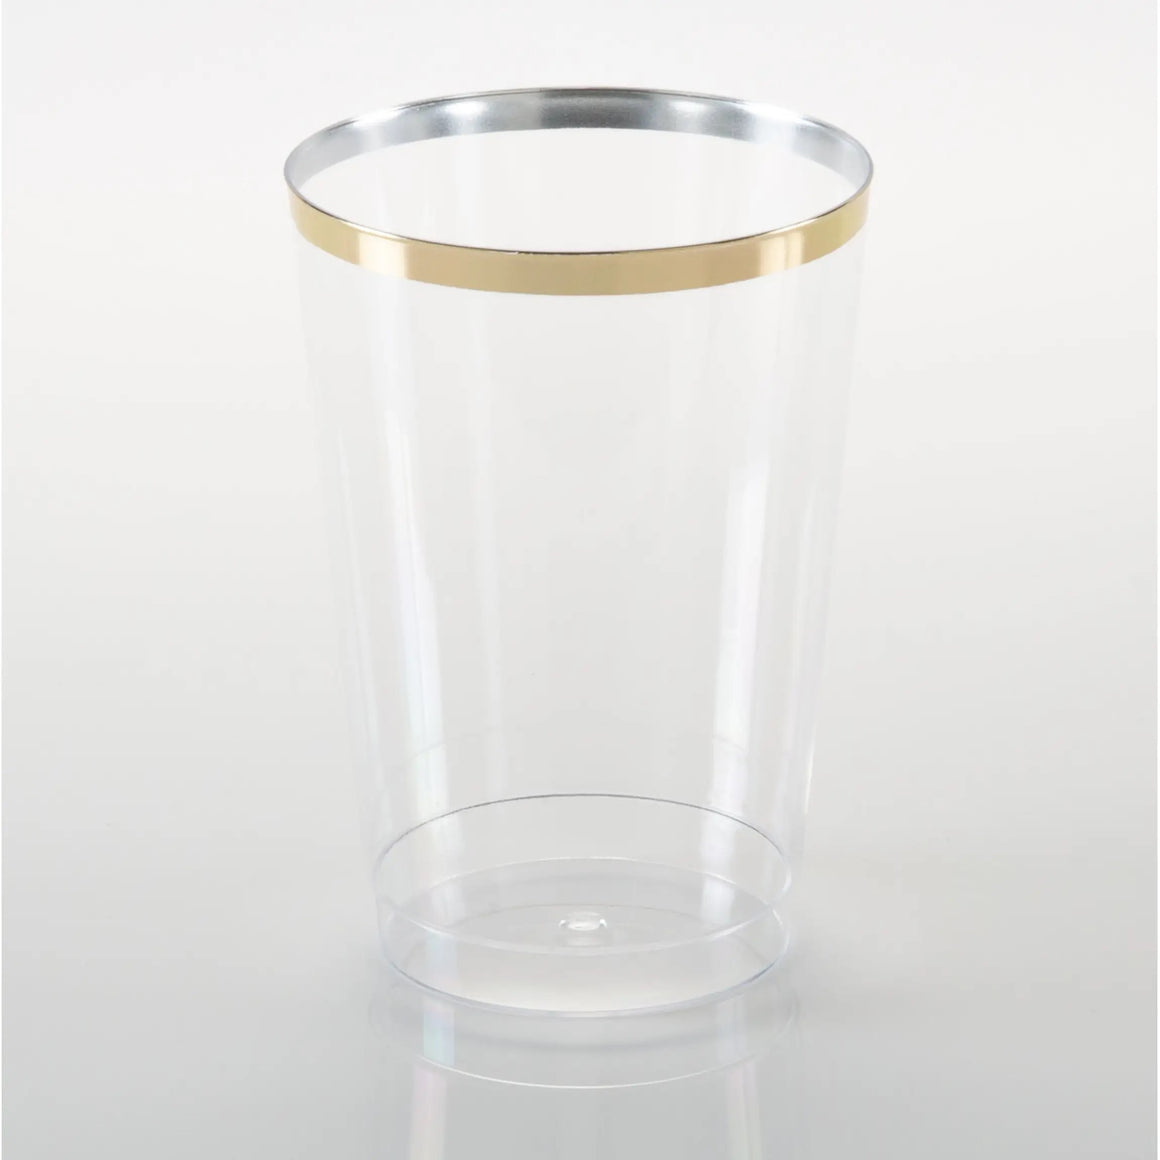 LUXE TUMBLER - CLEAR WITH GOLD EDGE